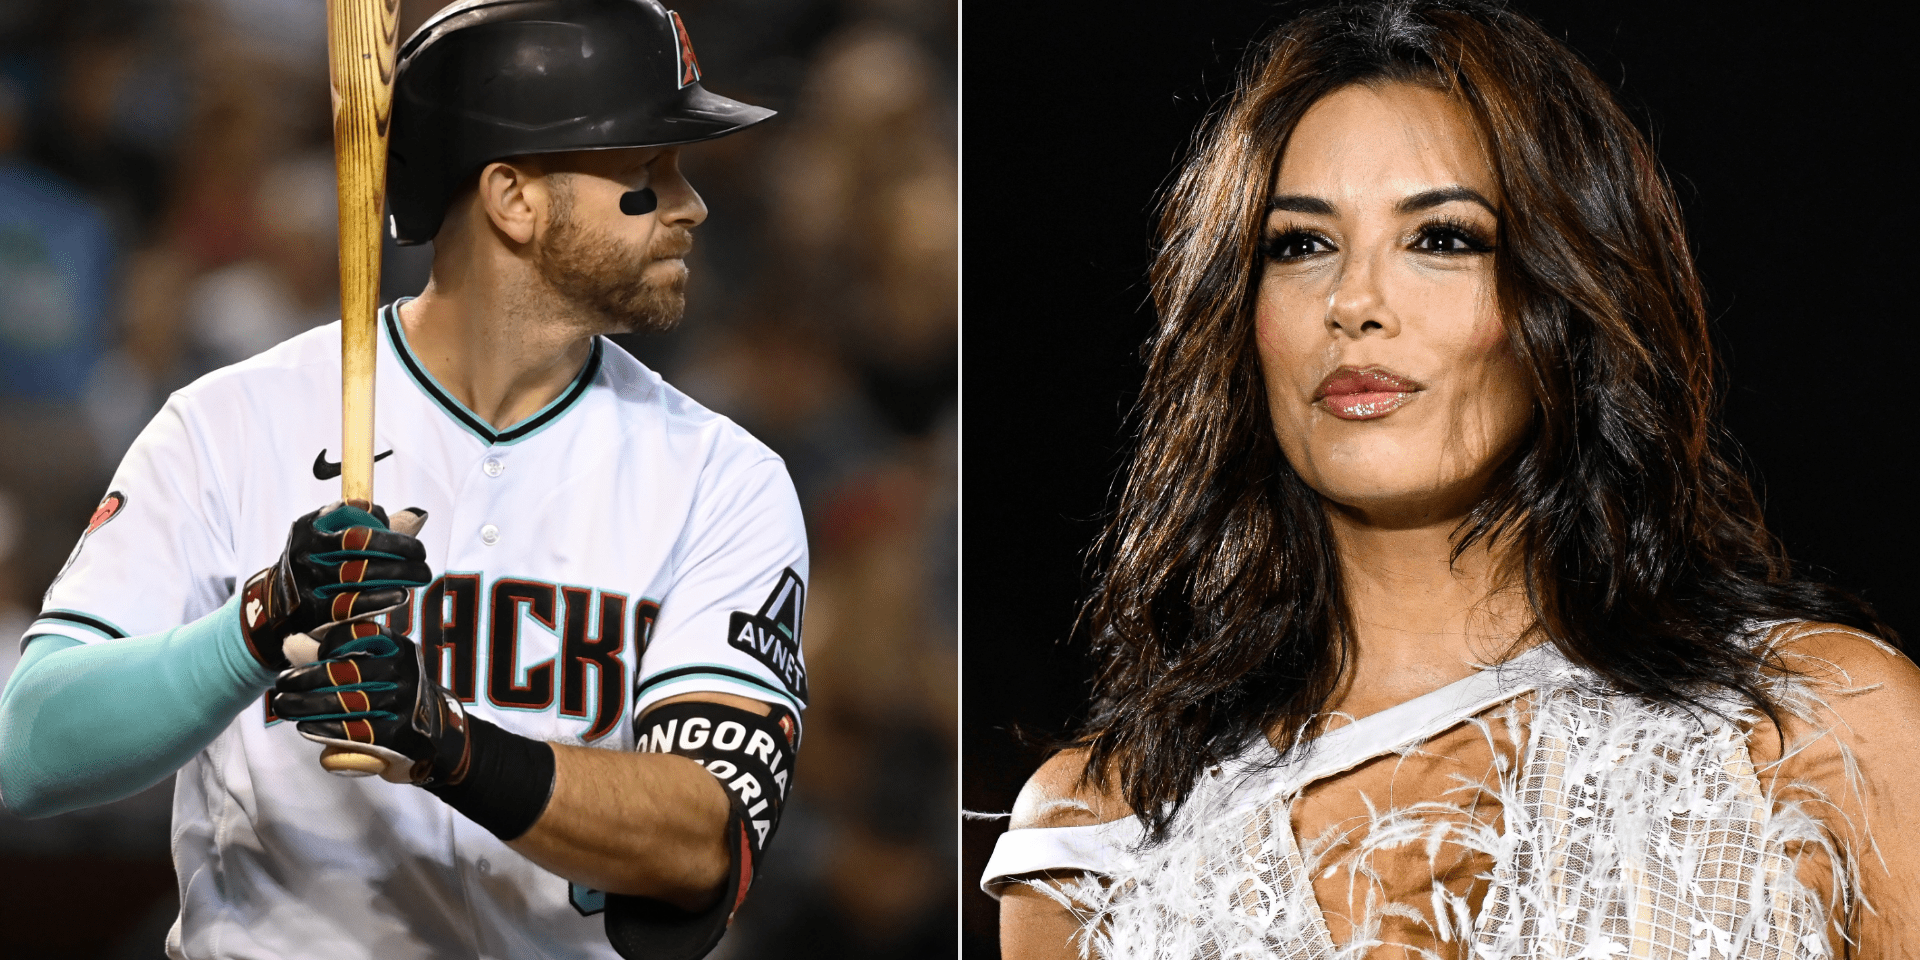 Is Evan Longoria related to Eva Longoria? What to know about Diamondbacks star's connection with actress